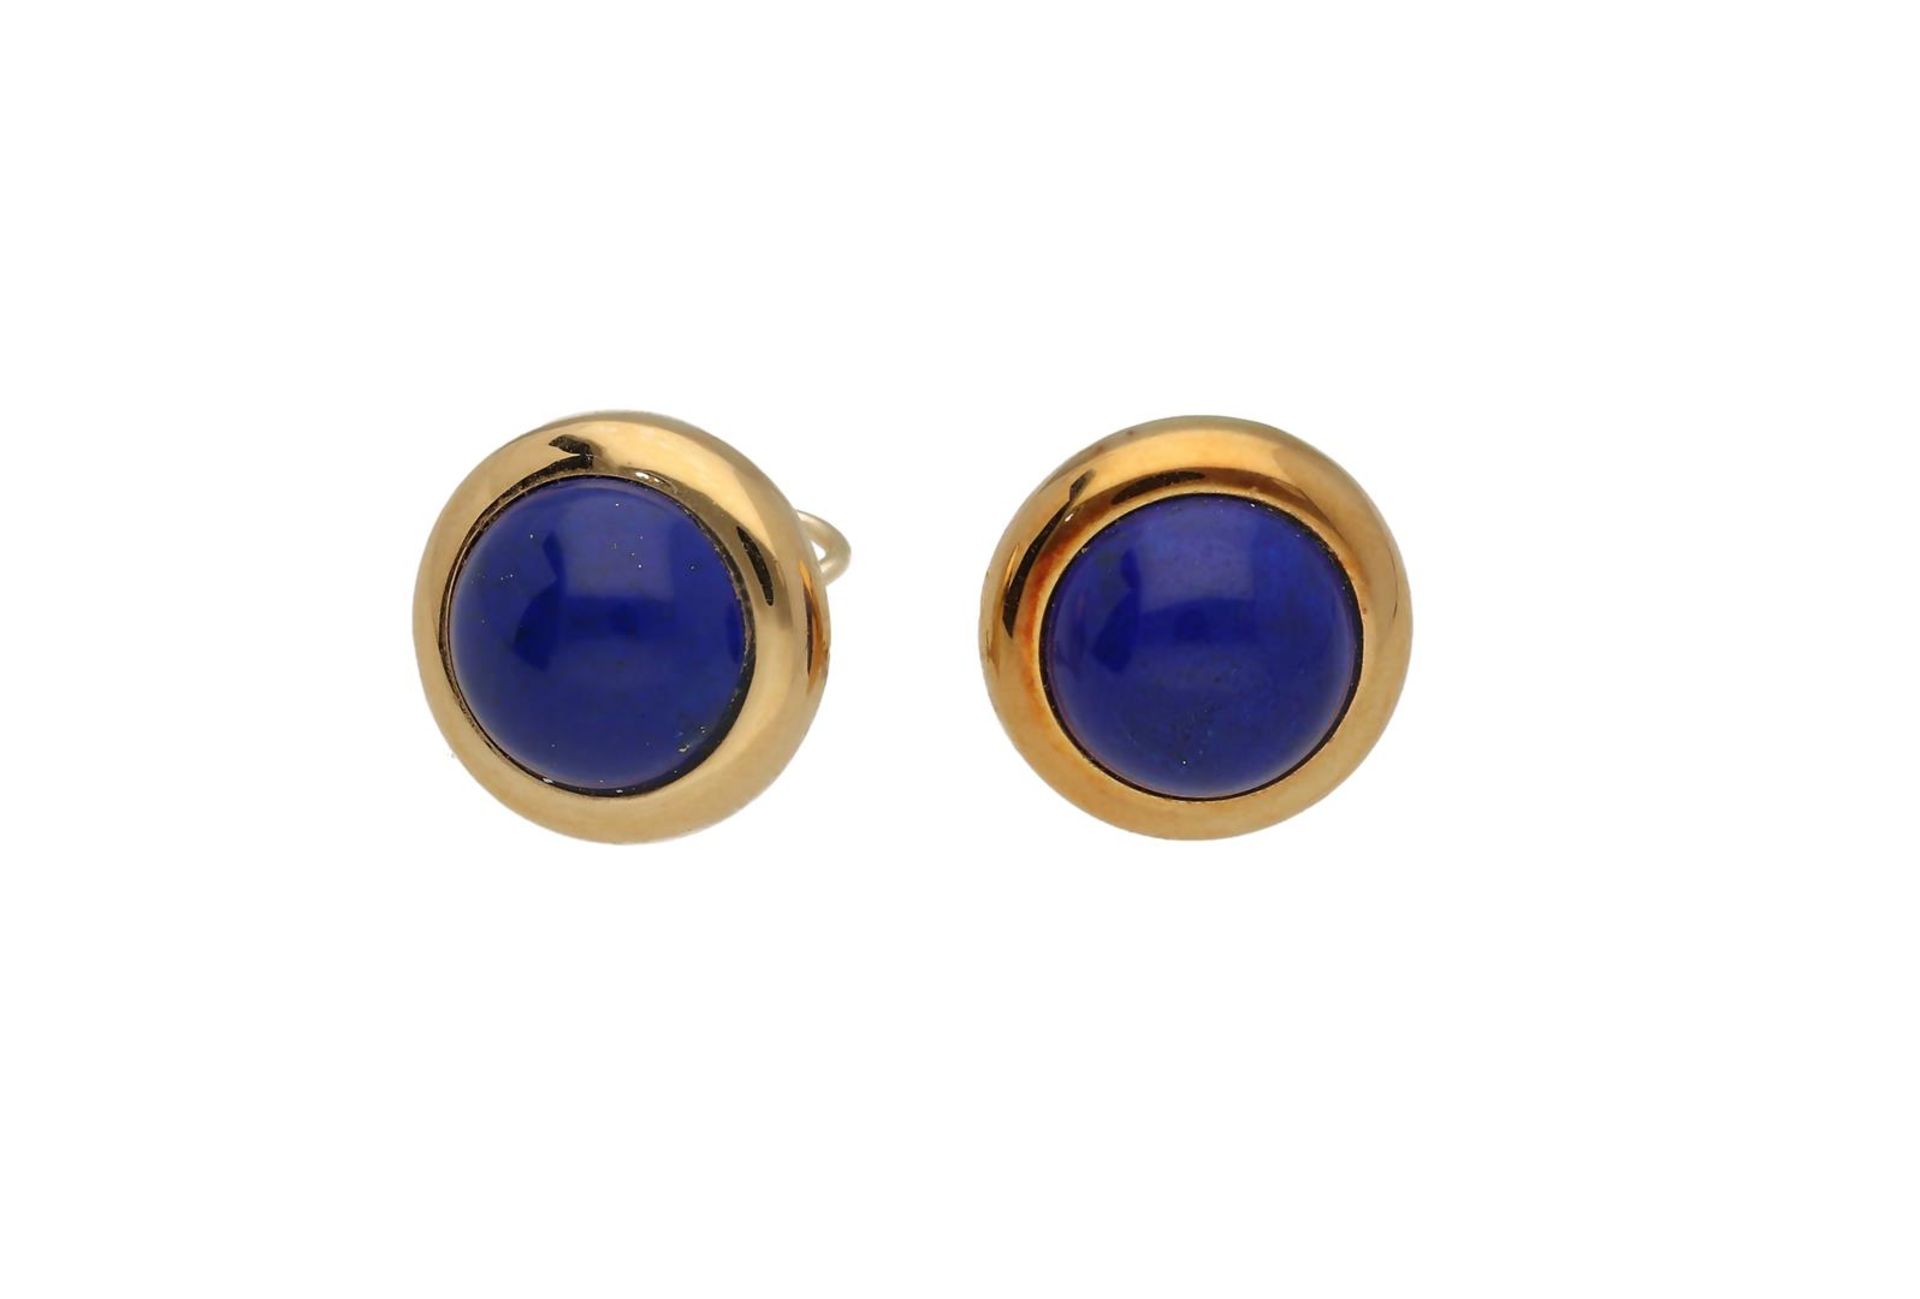 A pair of 14-kt. gold earclips, set with lapis lazuli cabochons.
D: 1.7 cm. Total weight:  7.1 g.